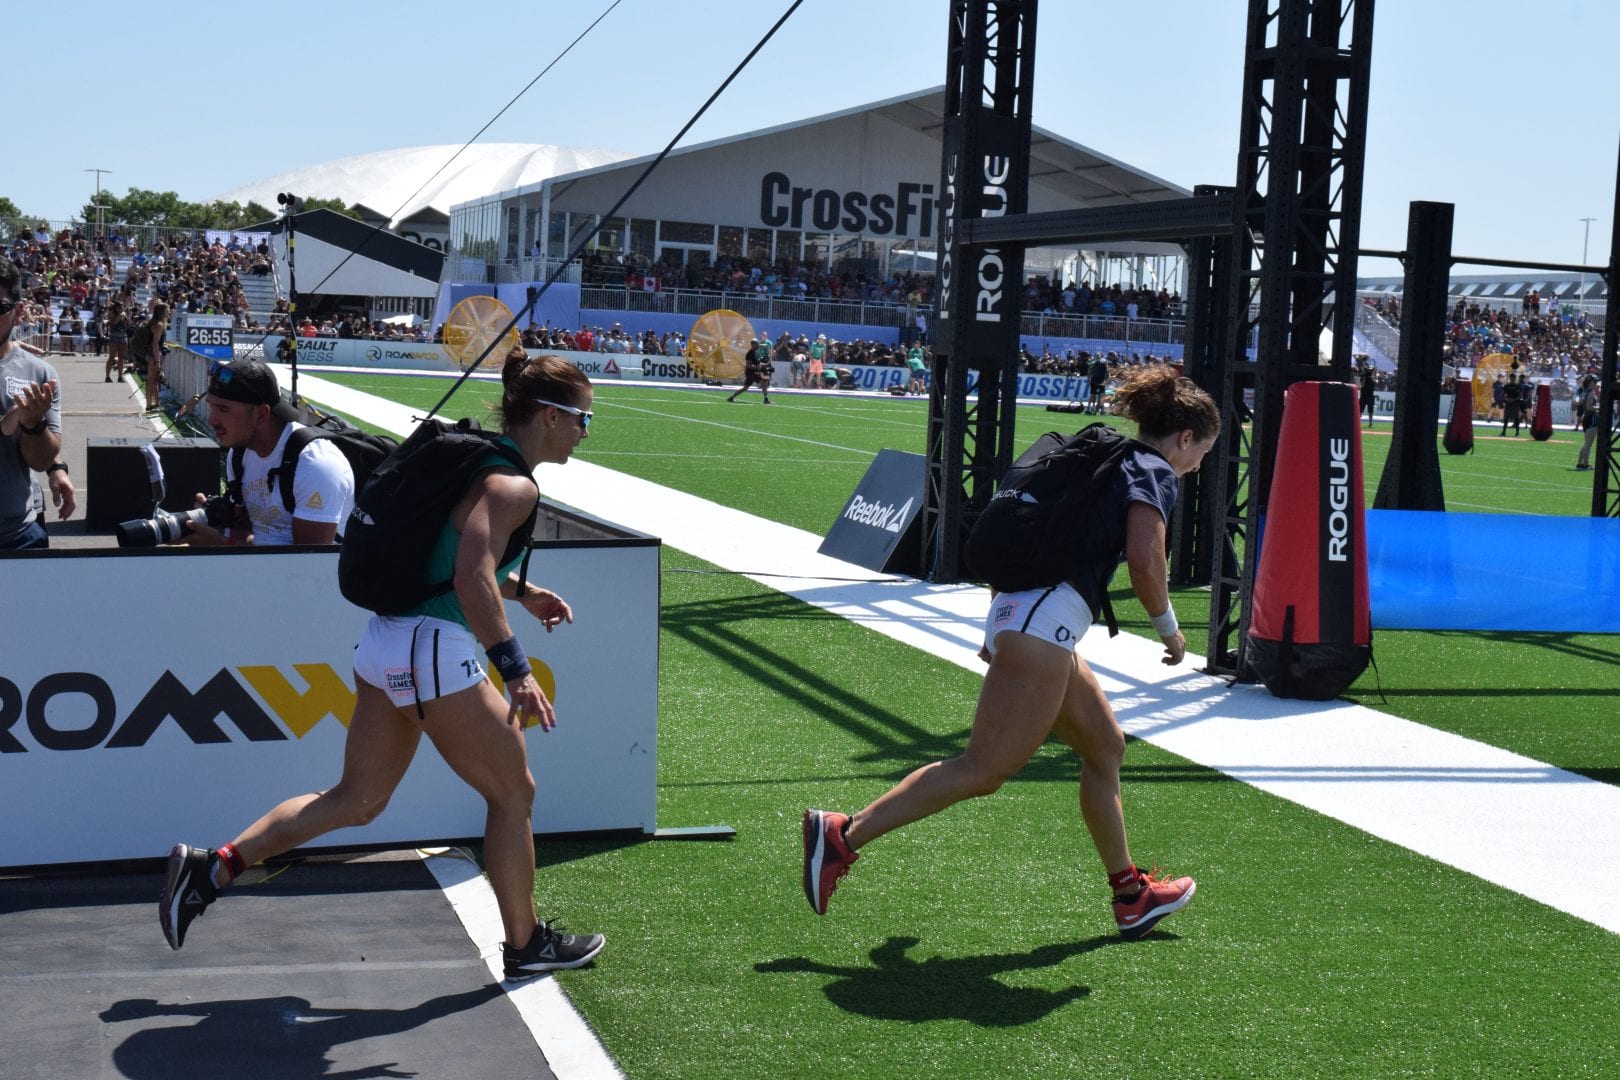 Kristin Holte of Norway completes the Ruck Run event at the 2019 CrossFit Games.